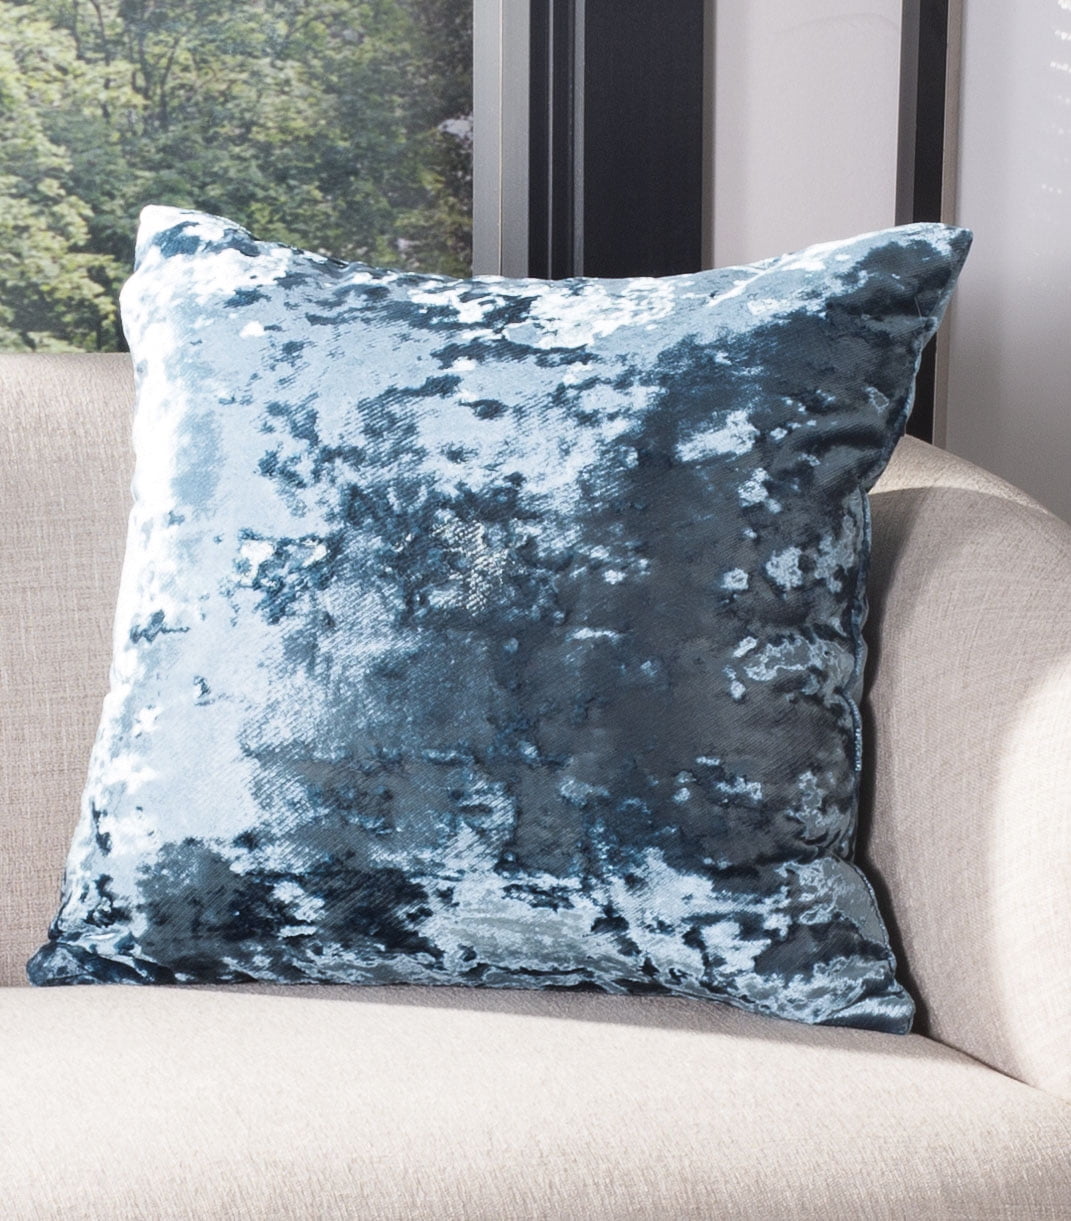 2 X UK MADE SHIMMERY CRUSHED TEXTURED SILVER GREY VELVET CUSHION COVER £9.99 SET 